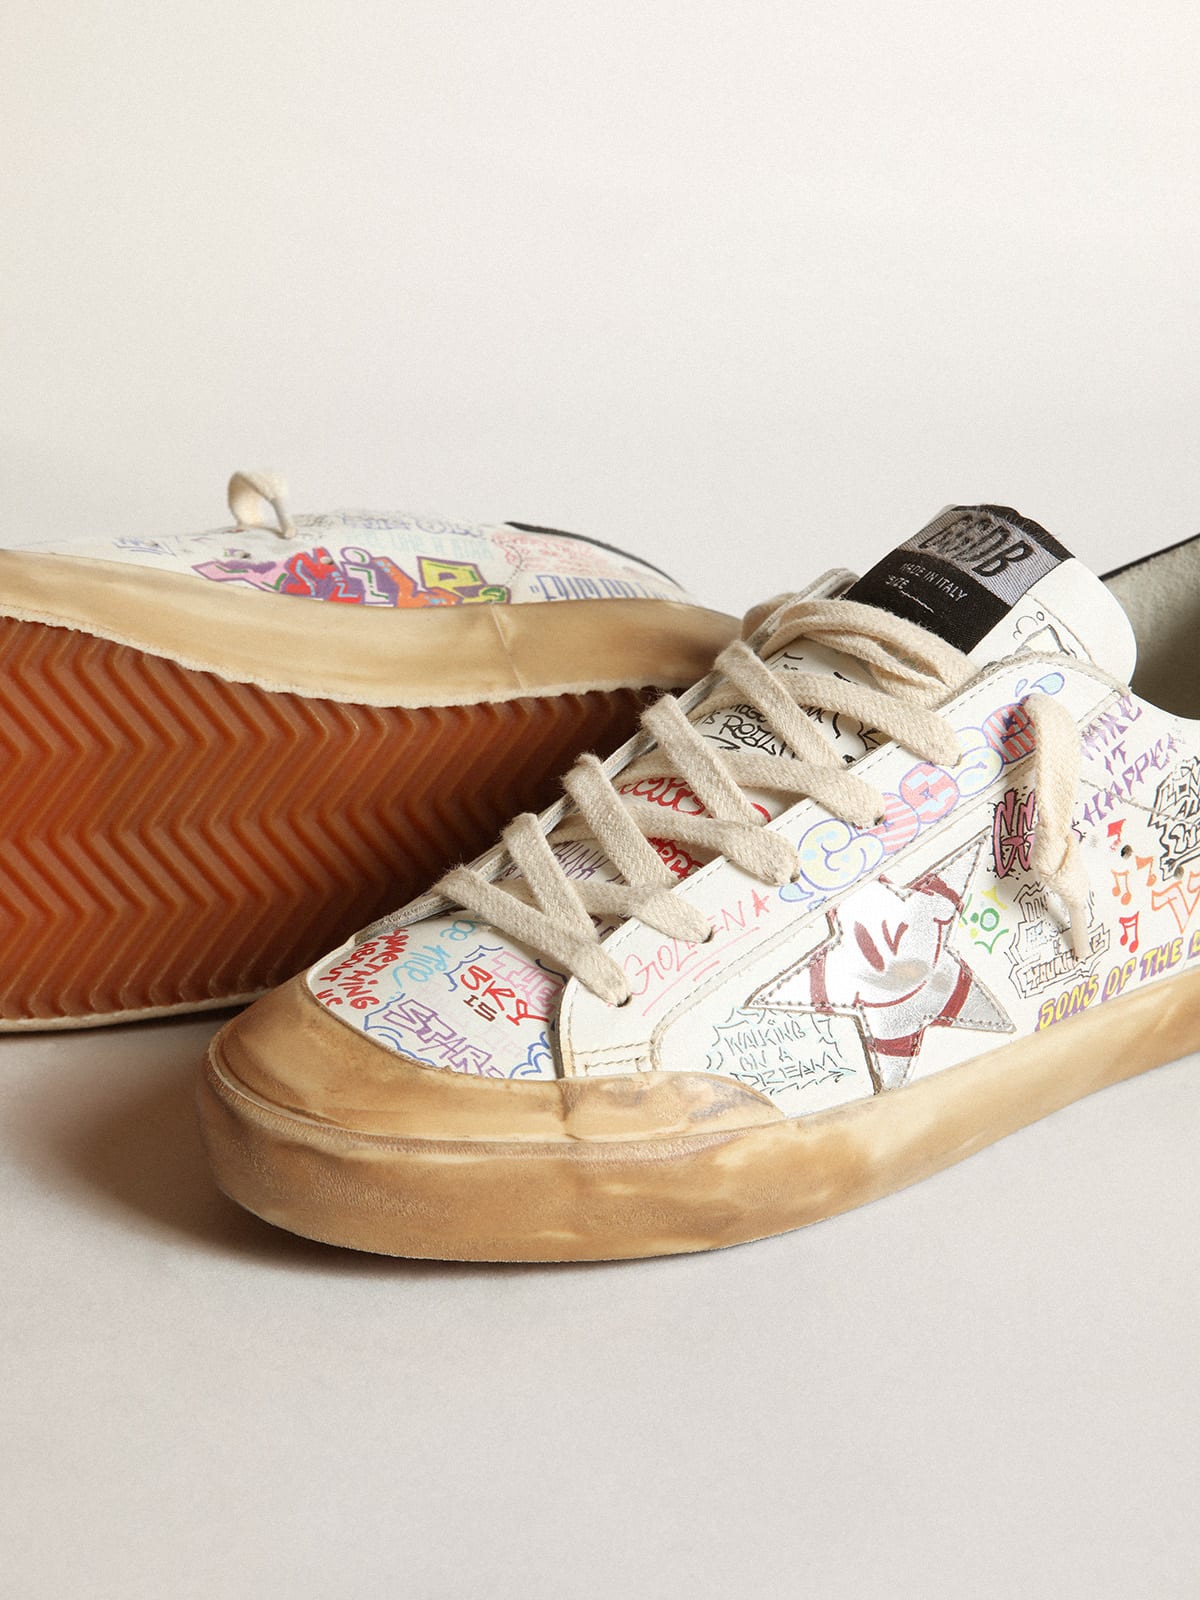 Golden Goose - Women's Super-Star Penstar in white leather and multicolor lettering in 